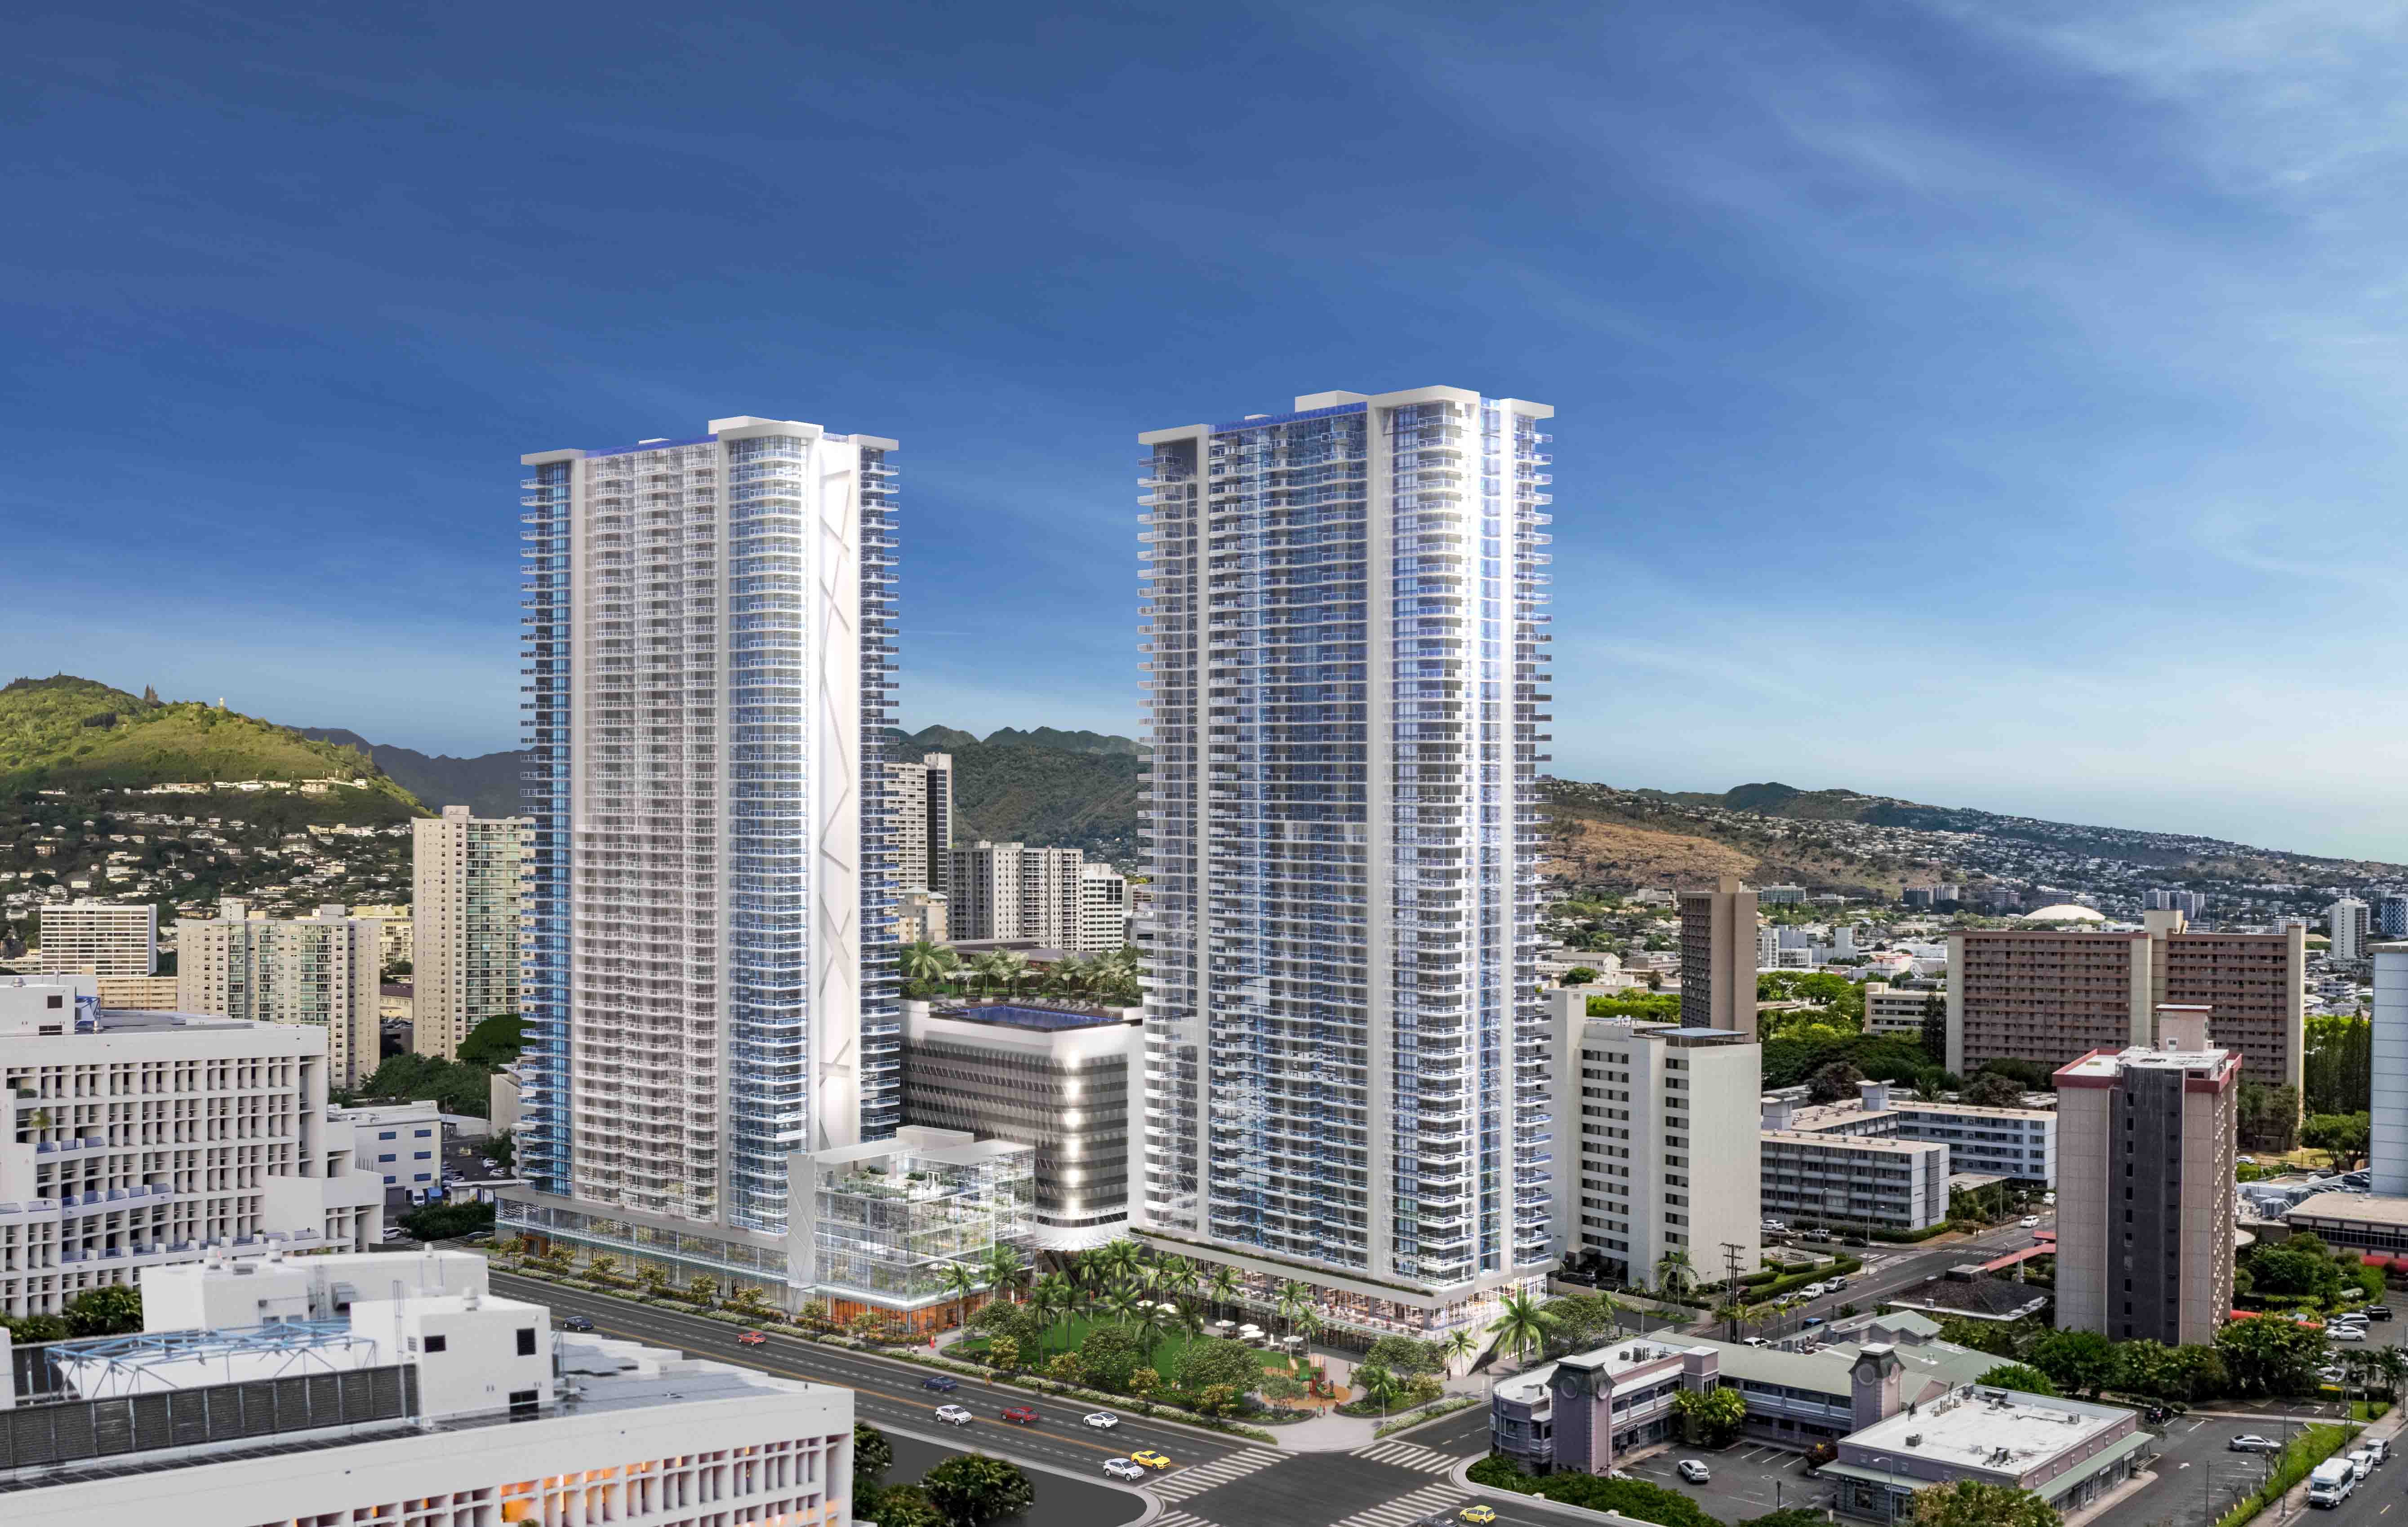 Silverstein Capital Partners Provides $528M Construction Loan for Honolulu Towers